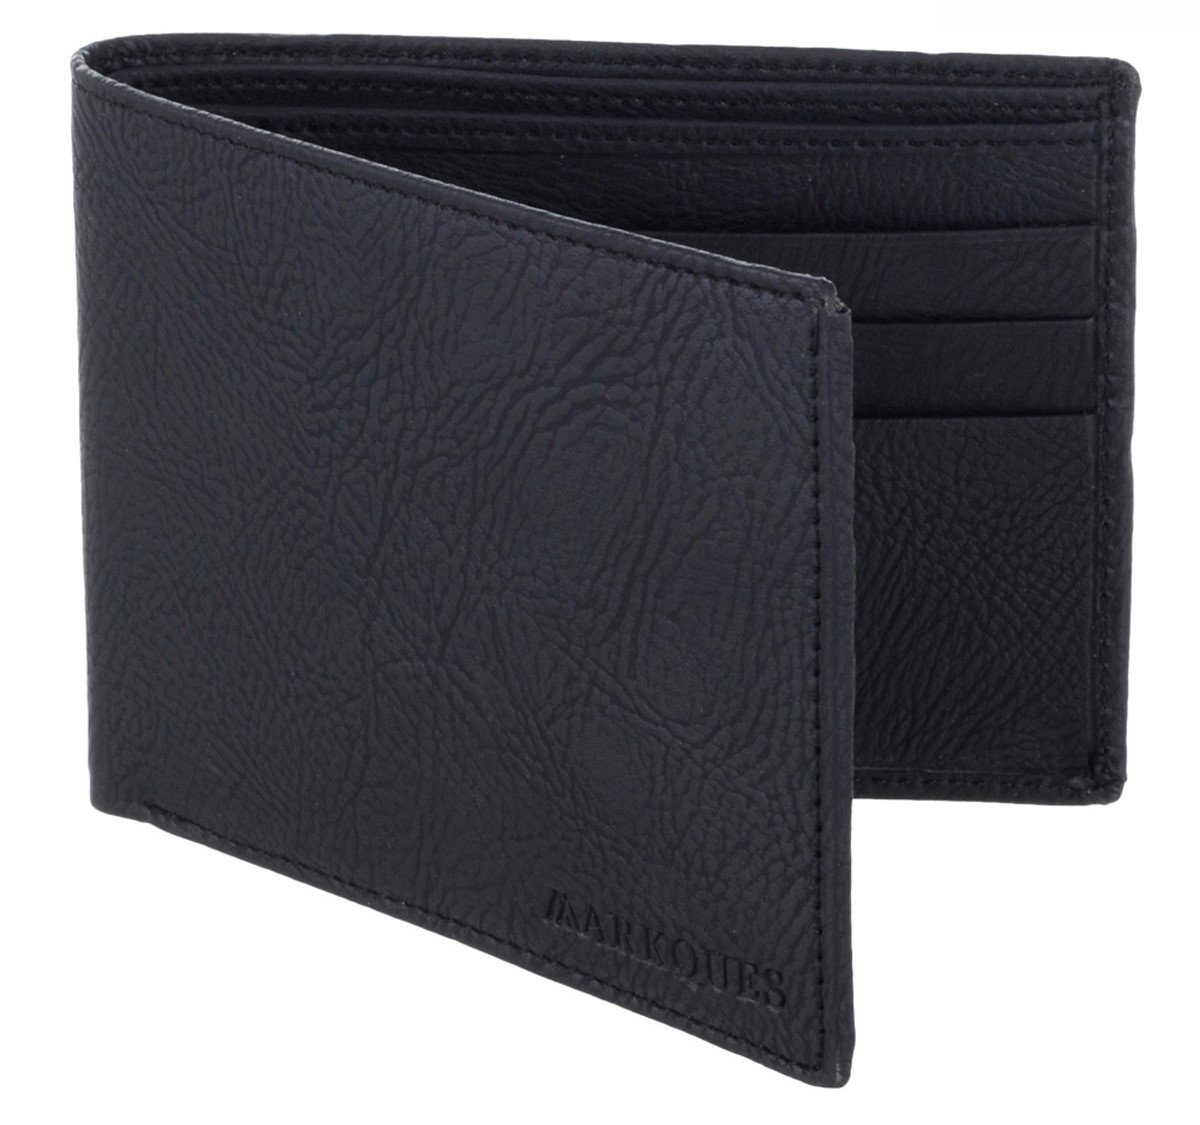 MarkQues Classic Black PU Leather Mens Wallet (CL-4401)